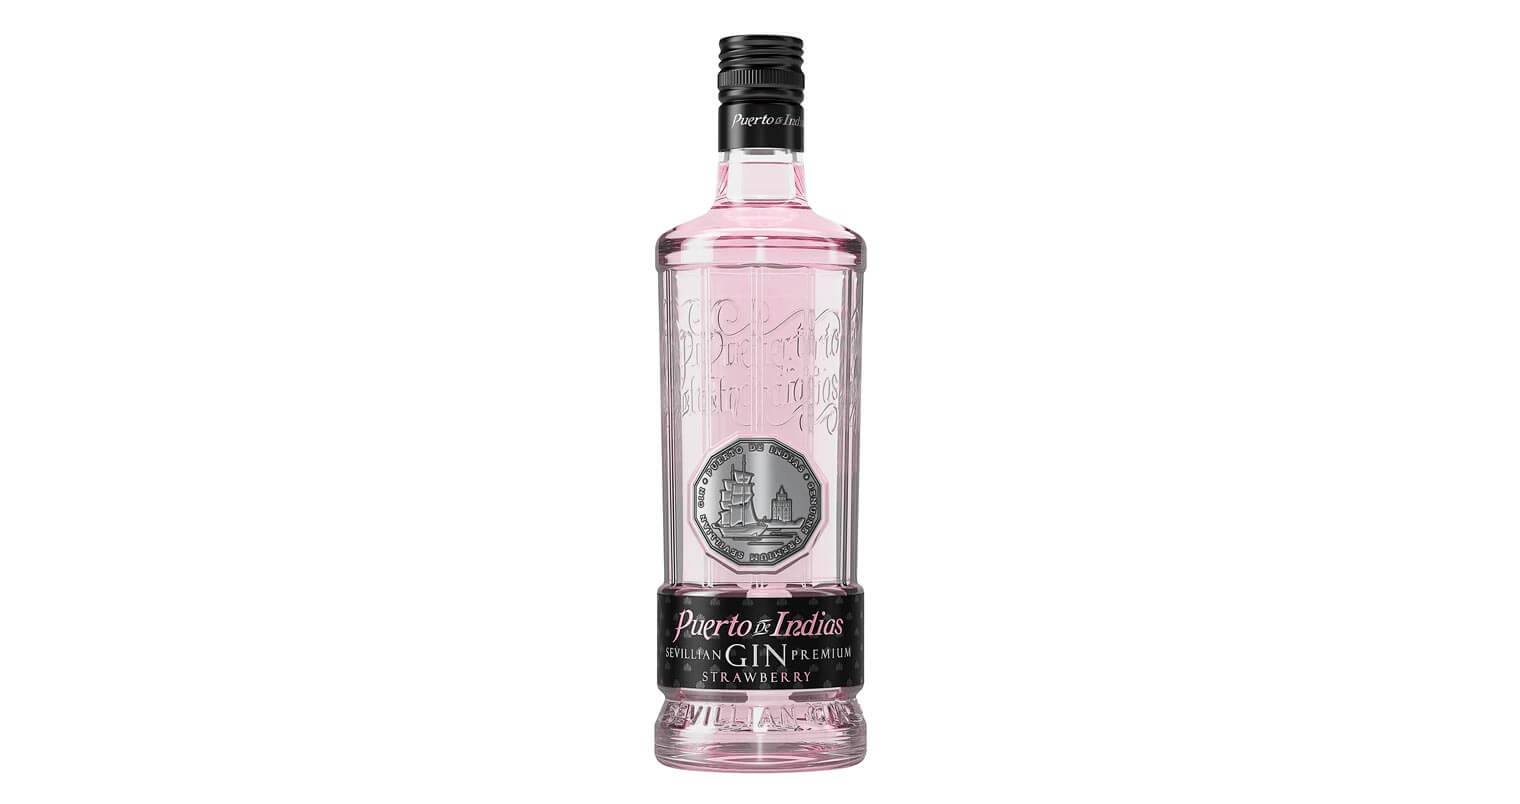 Puerto de Indias Strawberry Gin, bottle on white featured image